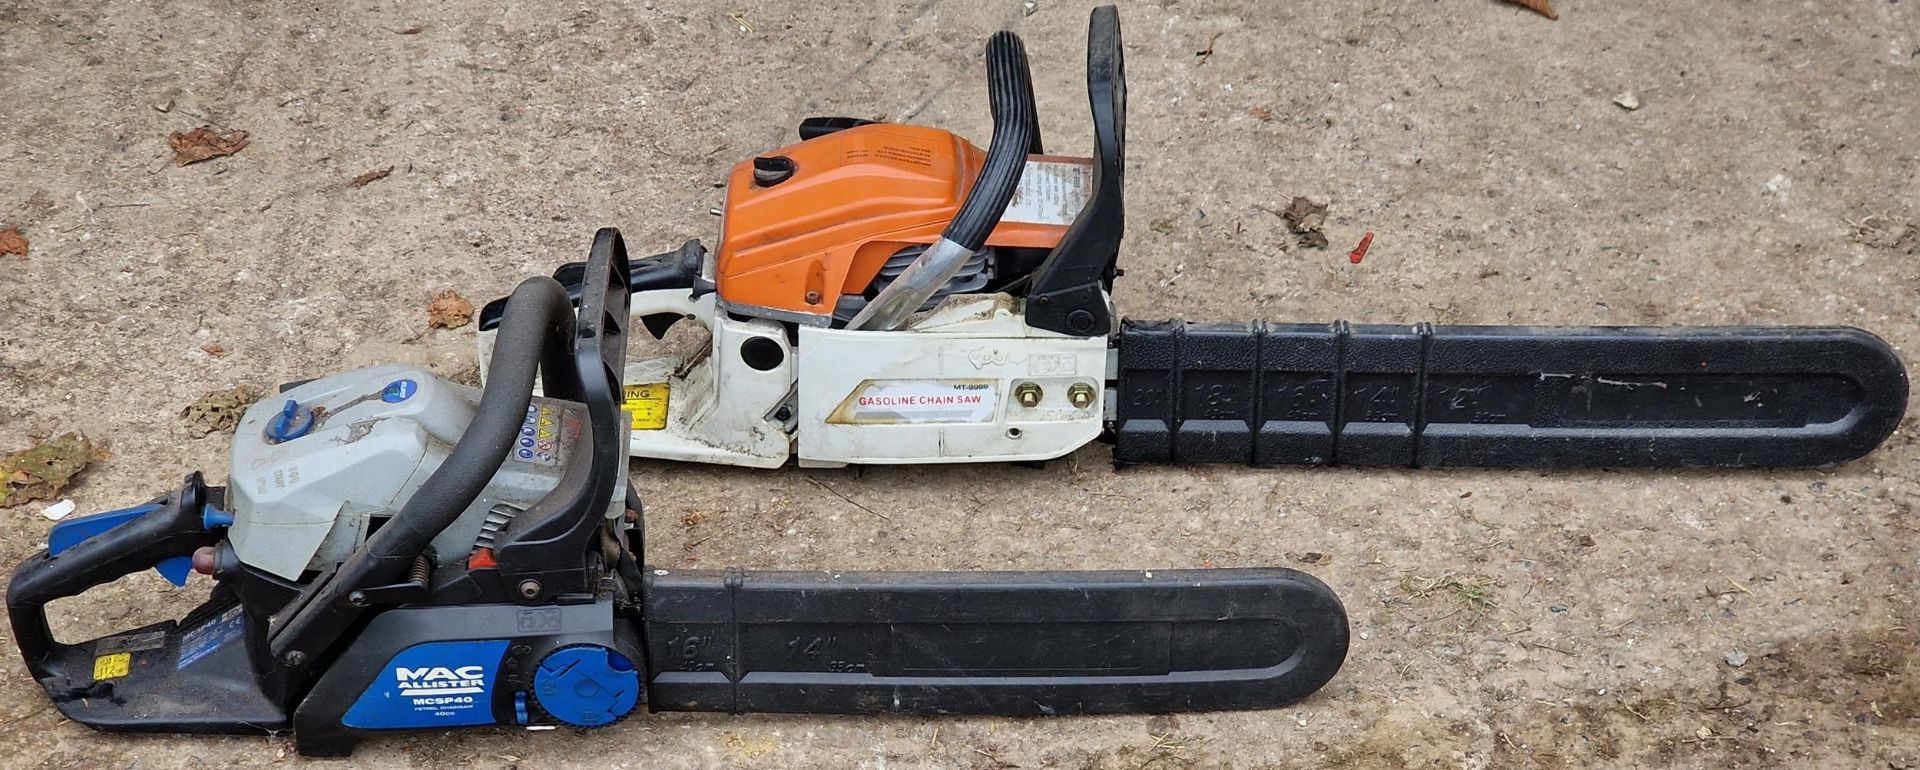 Mac Allister MCSP40 petrol chainsaw plus one other (2)